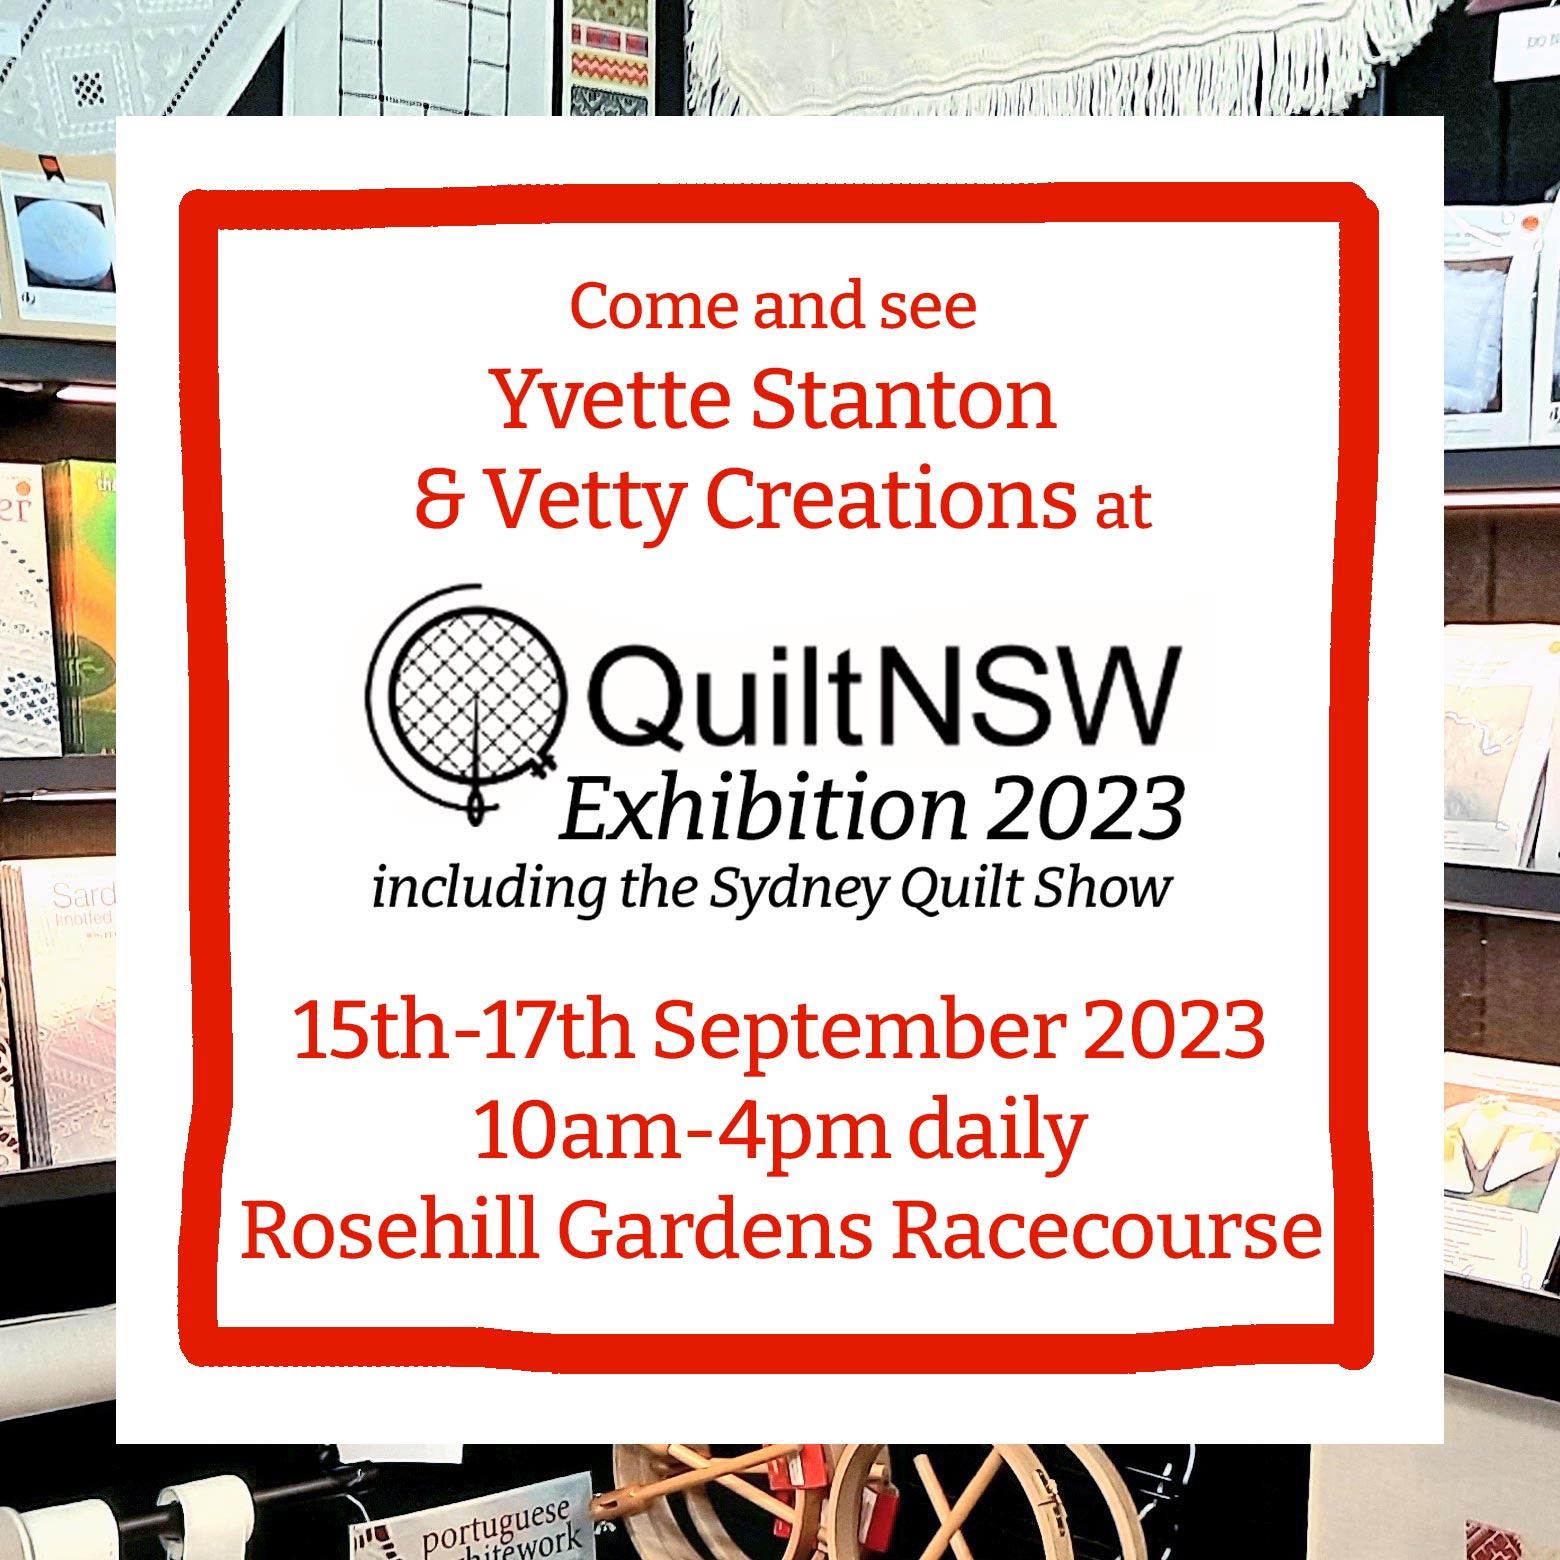 Vetty Creations at QuiltNSW CraftAlive